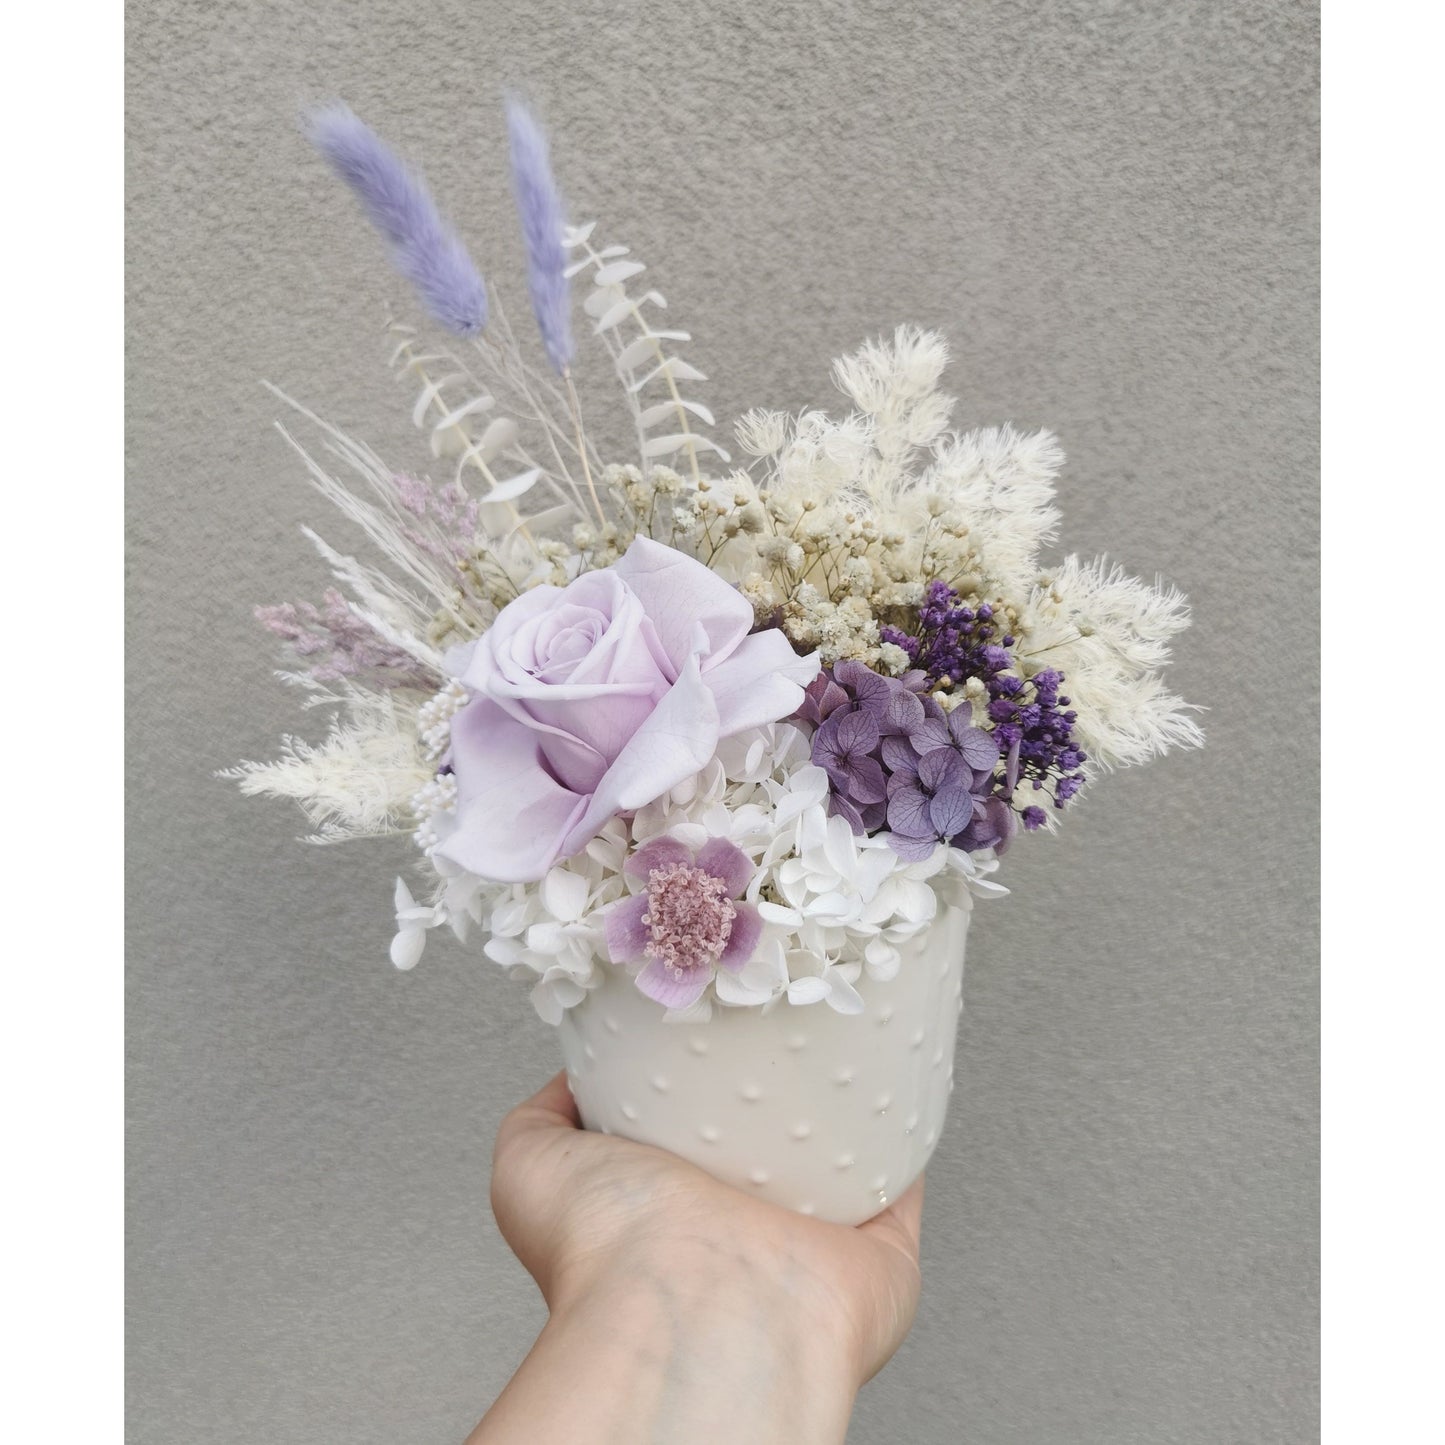 Dried & Preserved flower arrangement in purple & white and featuring a purple preserved rose and nestled in to a white pot. Photo shows arrangement being held by hand against a blank wall